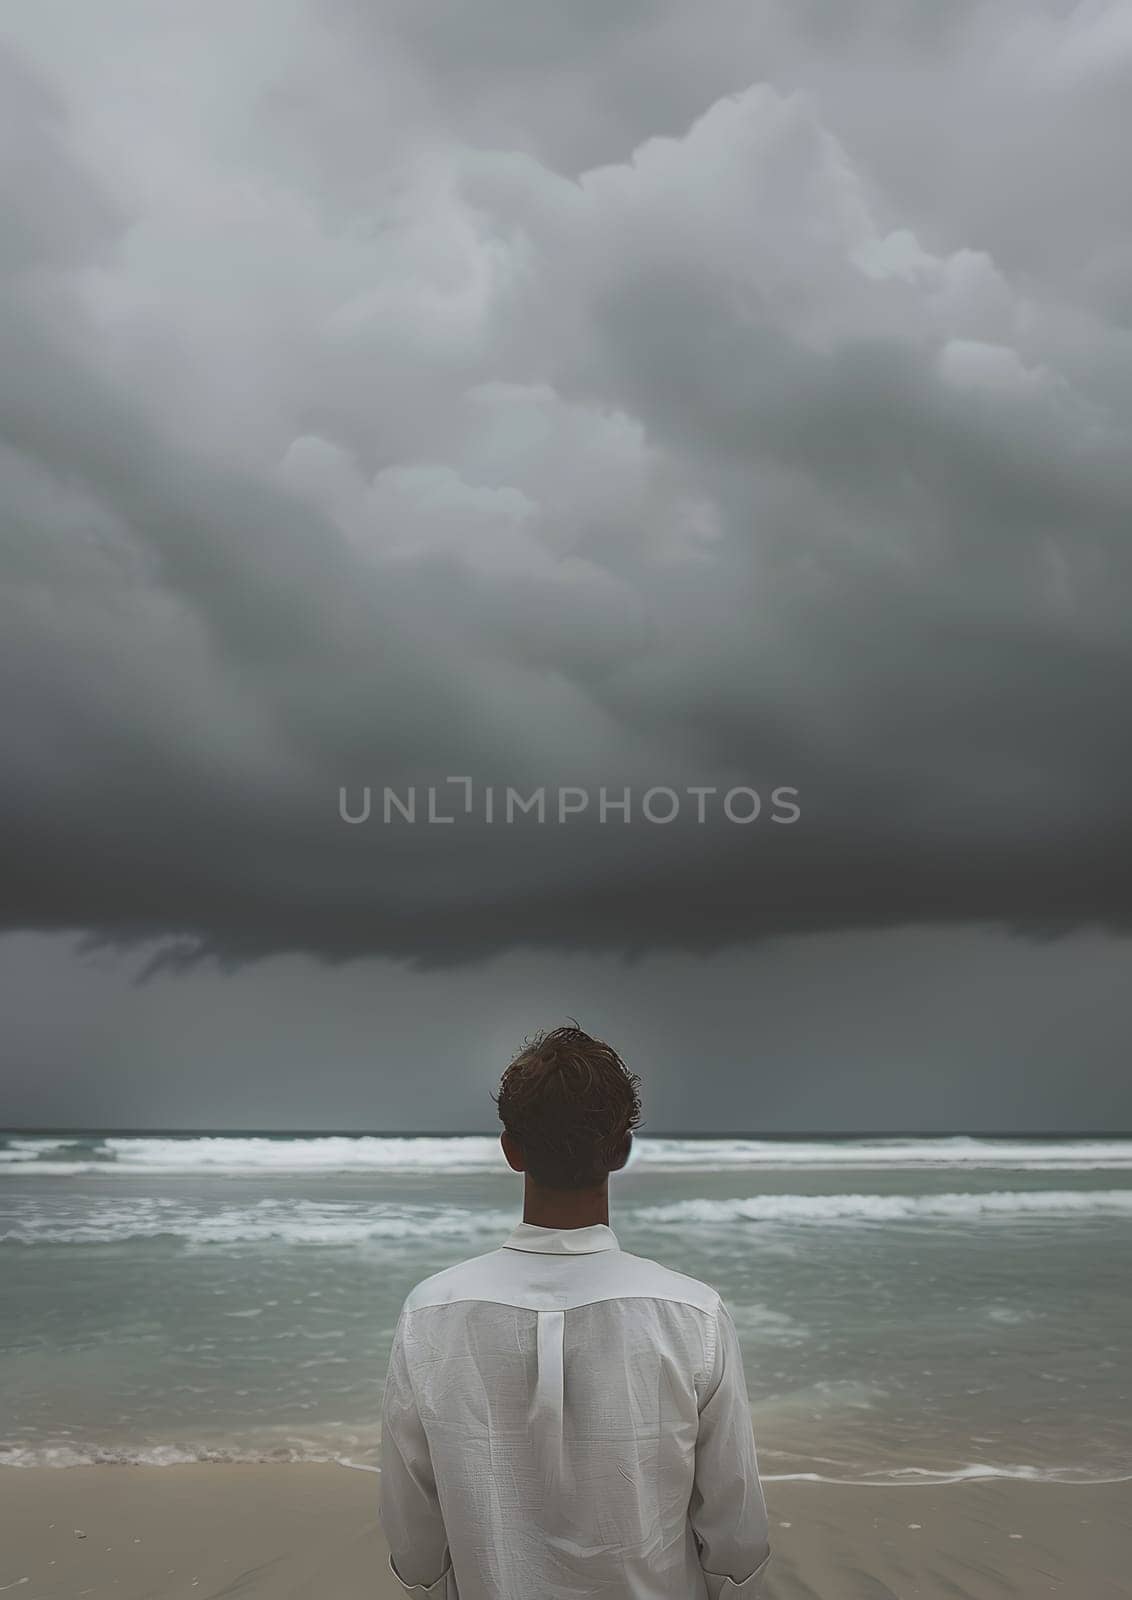 A man gazes out at the vast ocean from a sandy beach, mesmerized by the meeting of water and sky. The coastal landscape offers a serene escape with the horizon stretching into the distance